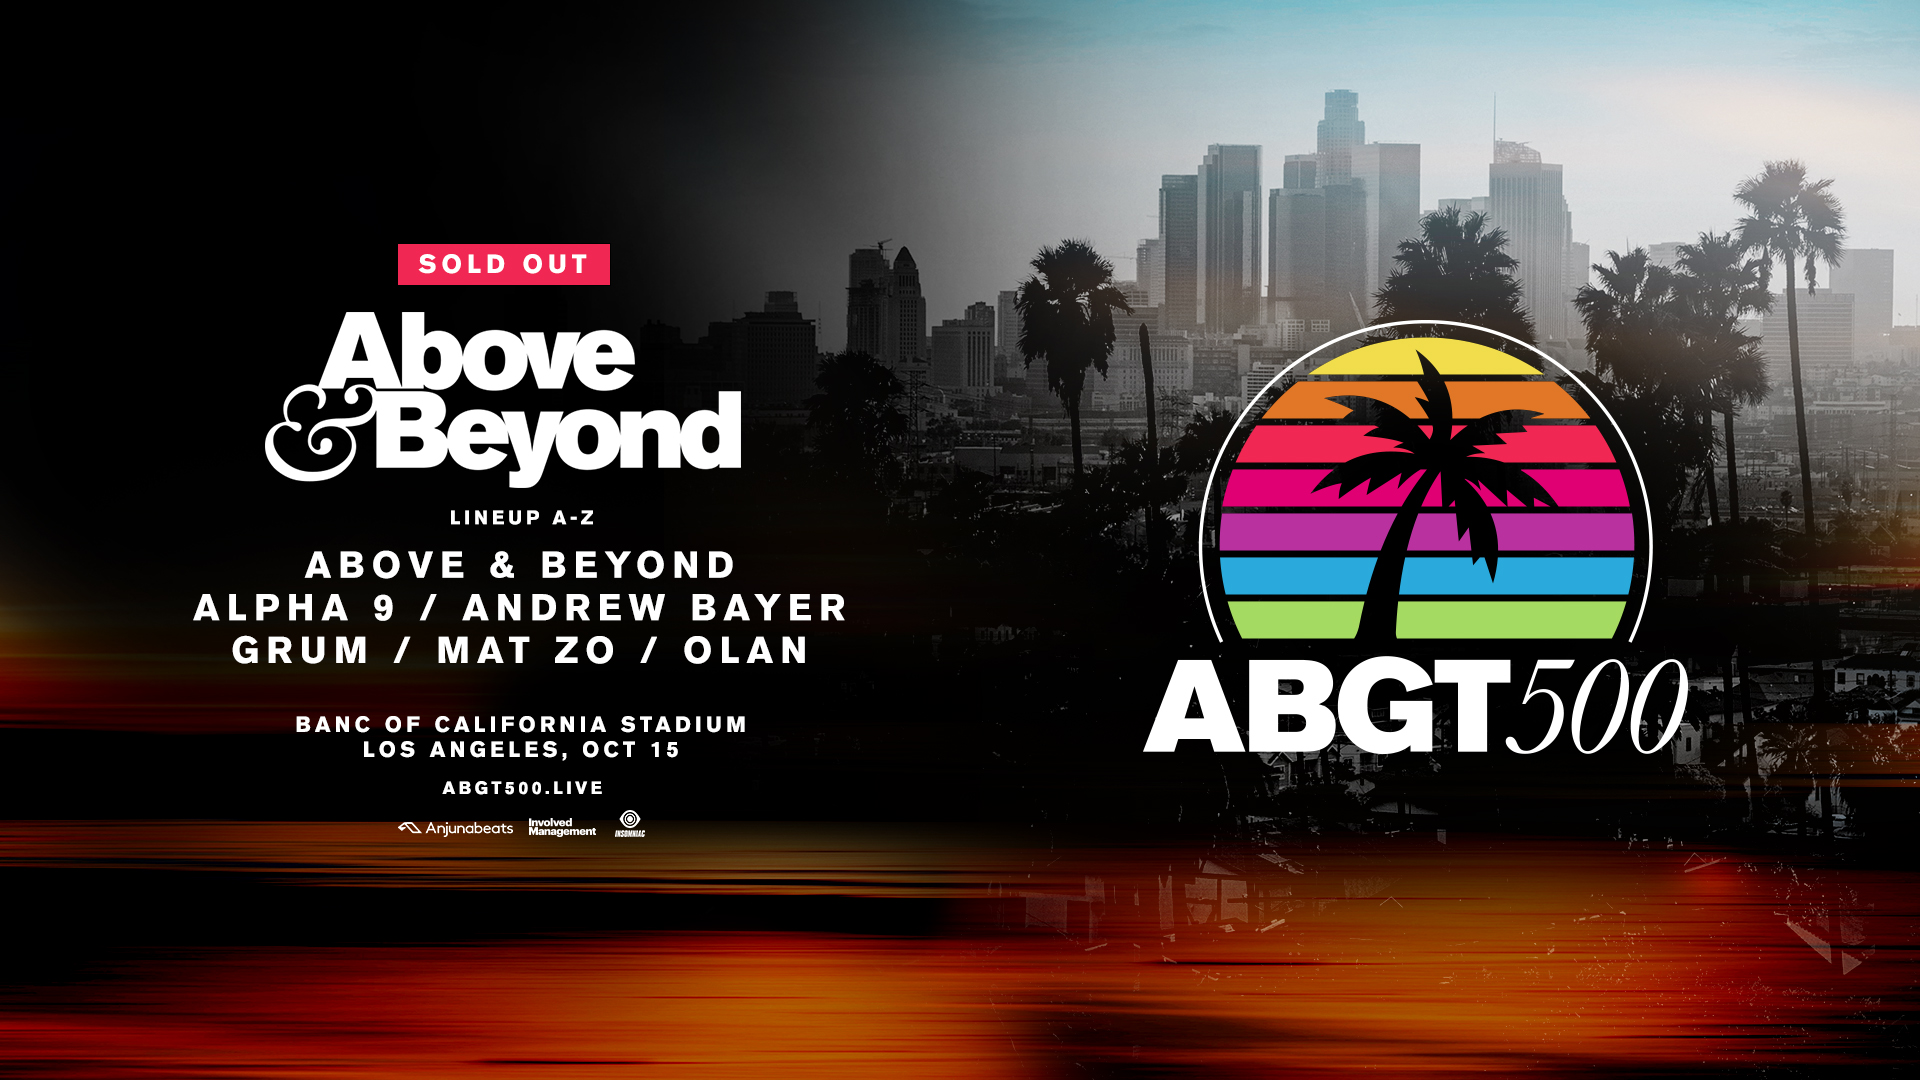 Above & Beyond Group Therapy 500